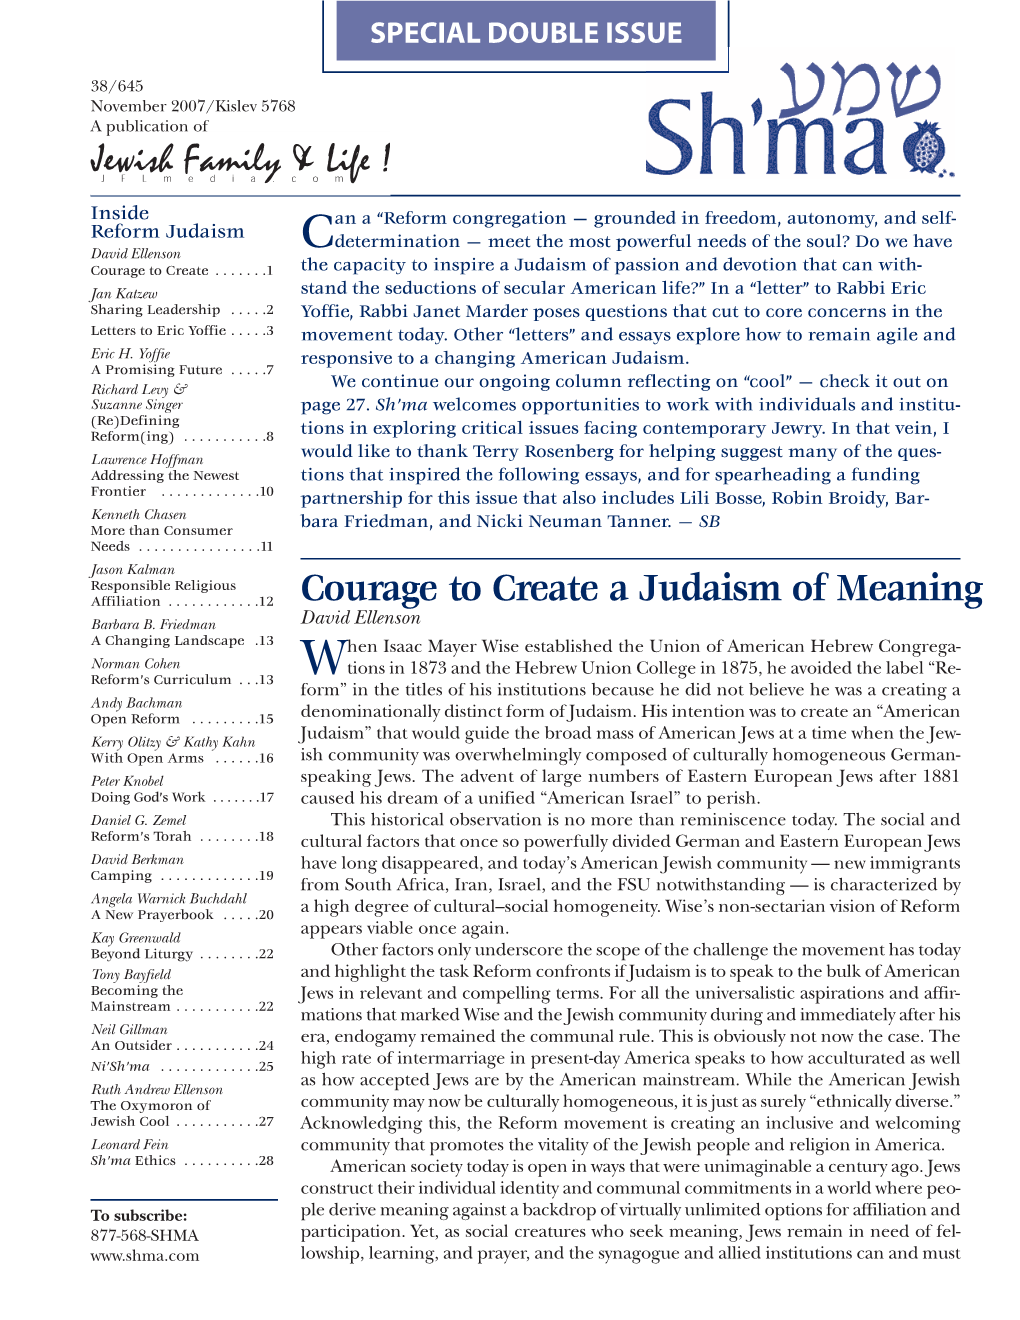 Courage to Create a Judaism of Meaning Barbara B